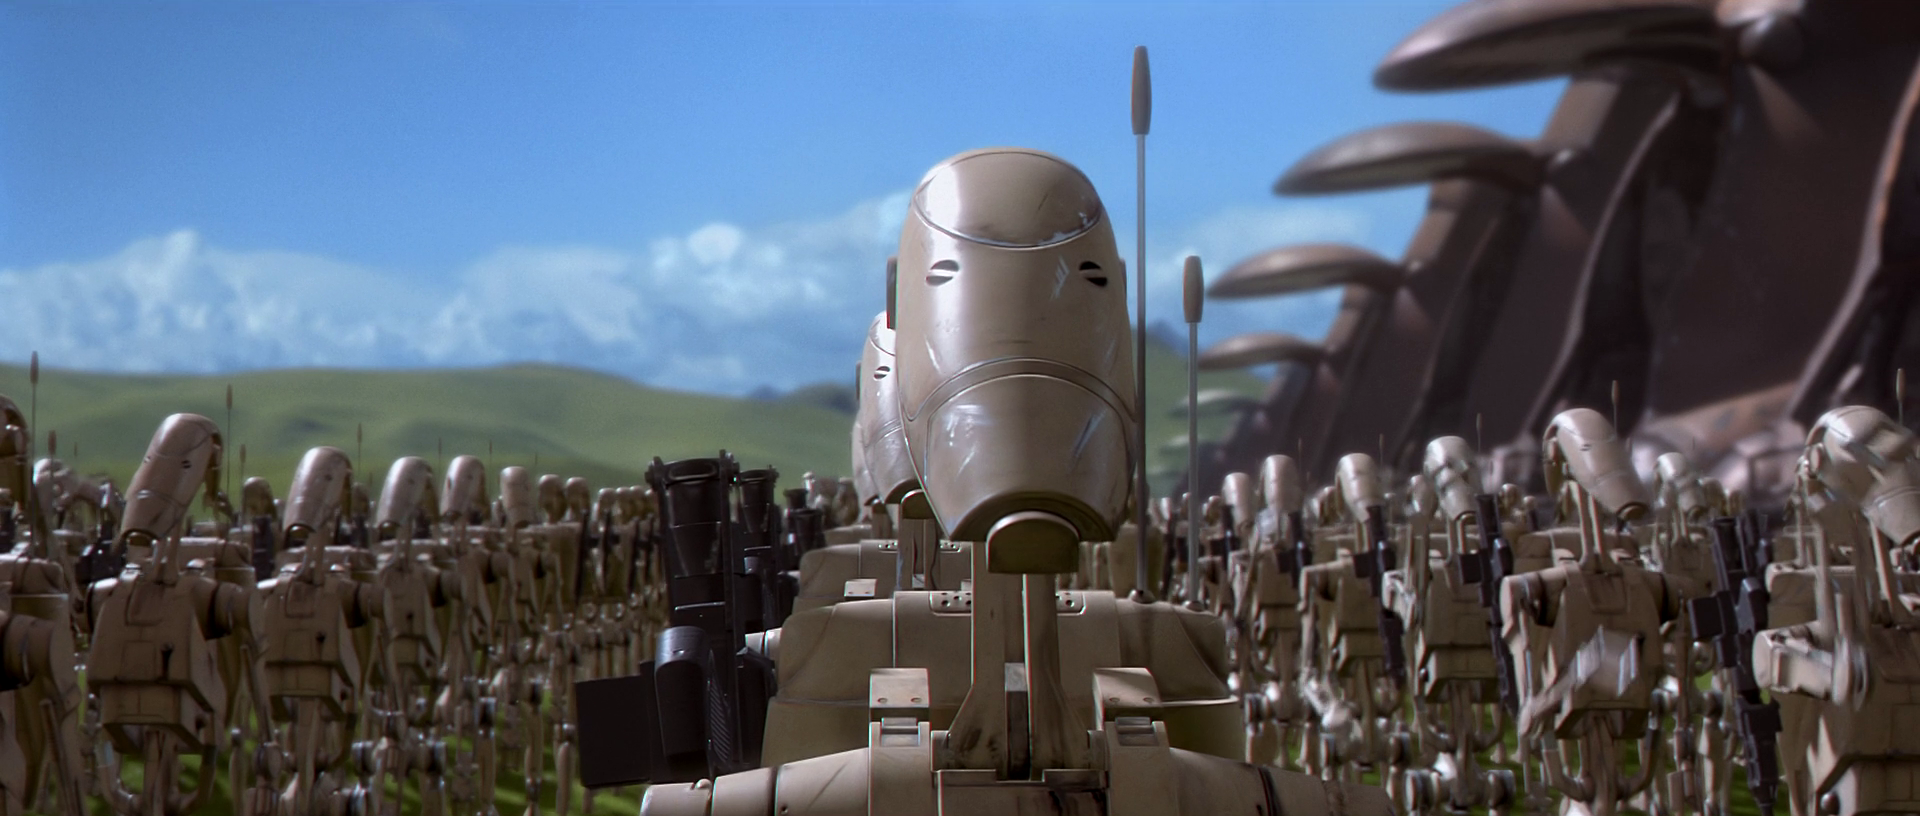 Battle_Droid_Army.png